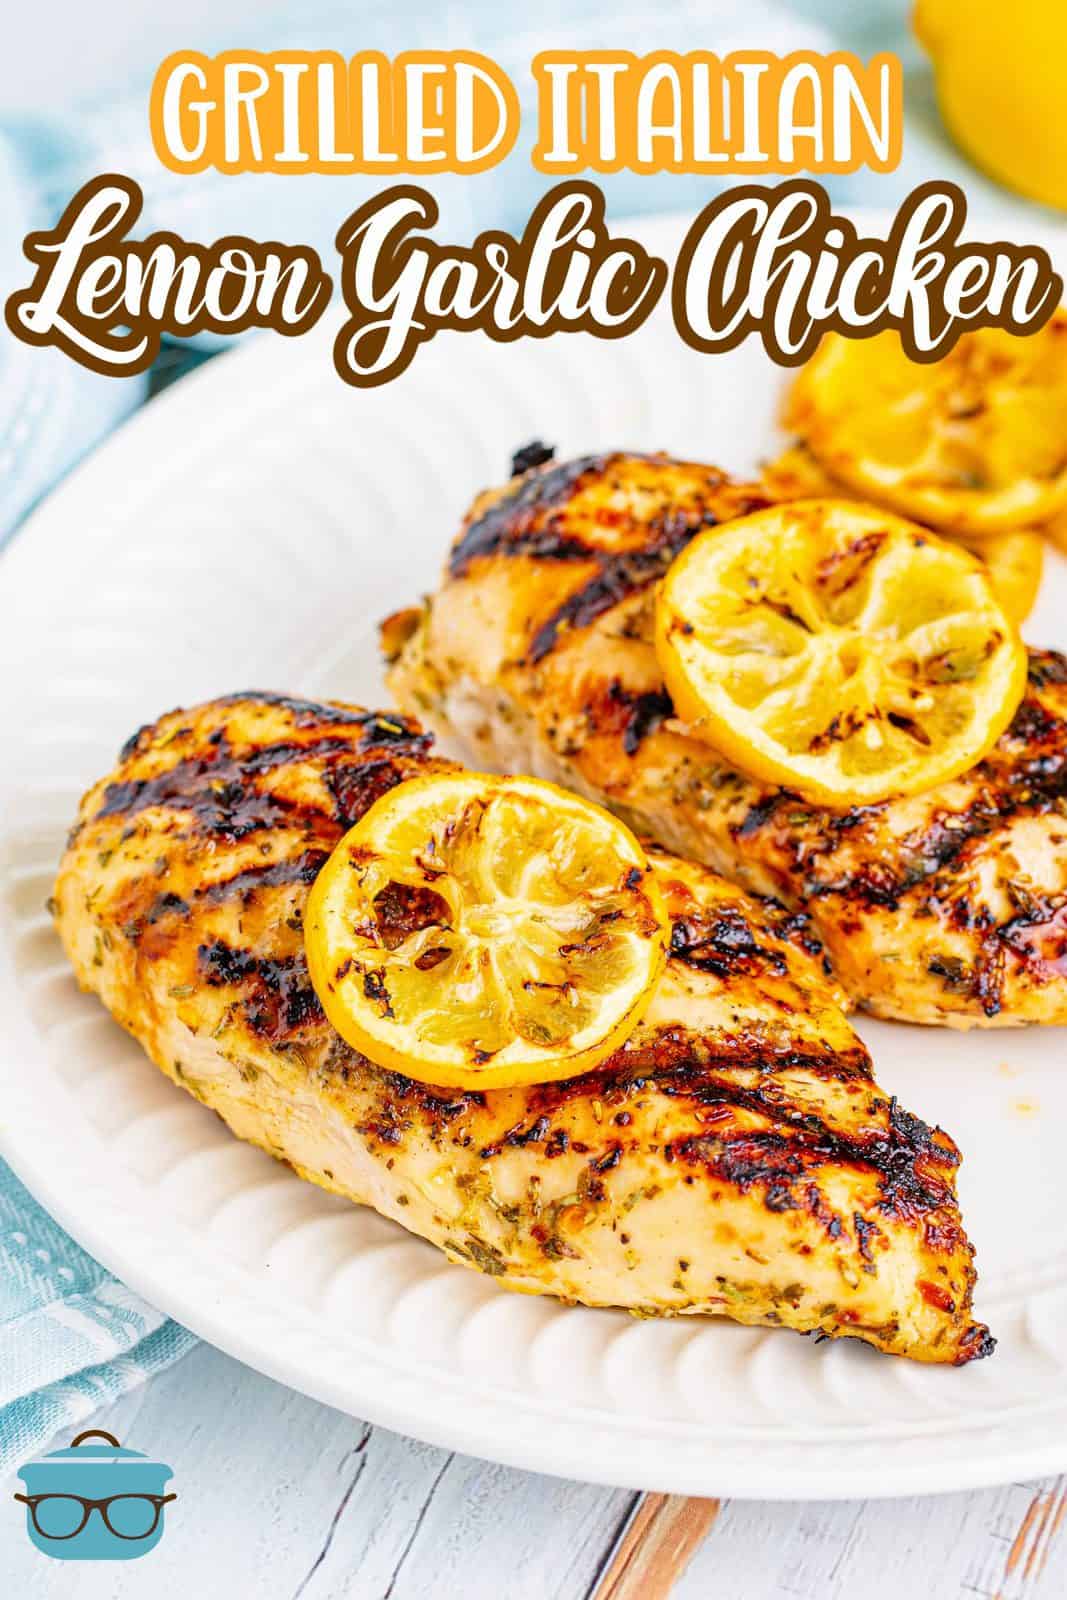 Grilled Italian Lemon Garlic Chicken Bread recipe from the Country Cook. Photo showing two grilled chicken breasts with lemon slices on top on a white round plate.